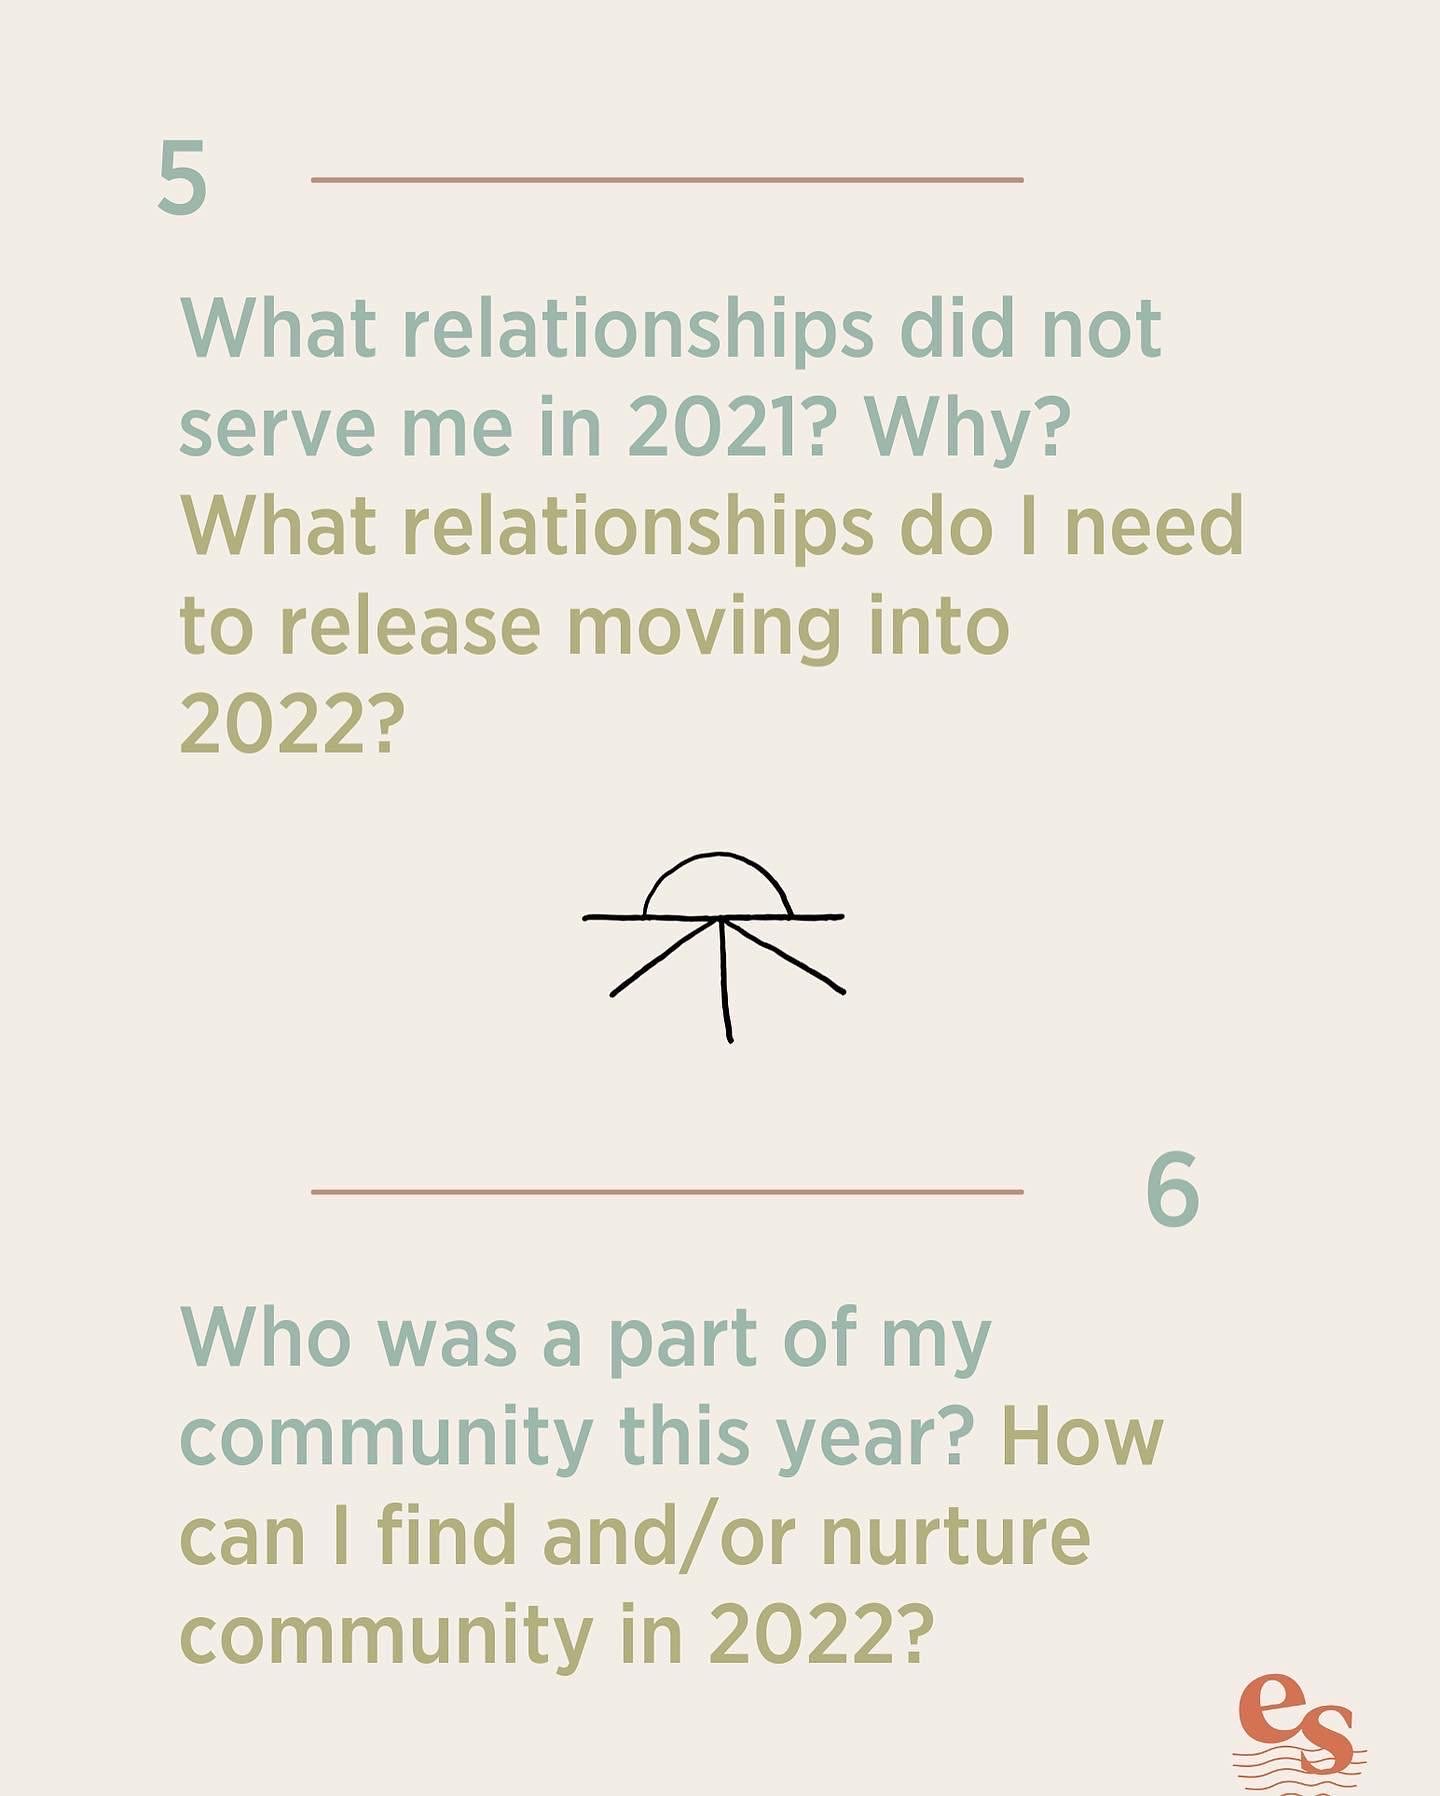 10 Self-Reflective Journal Prompts to Lead In to 2022 - Prompts 5 and 6.jpg